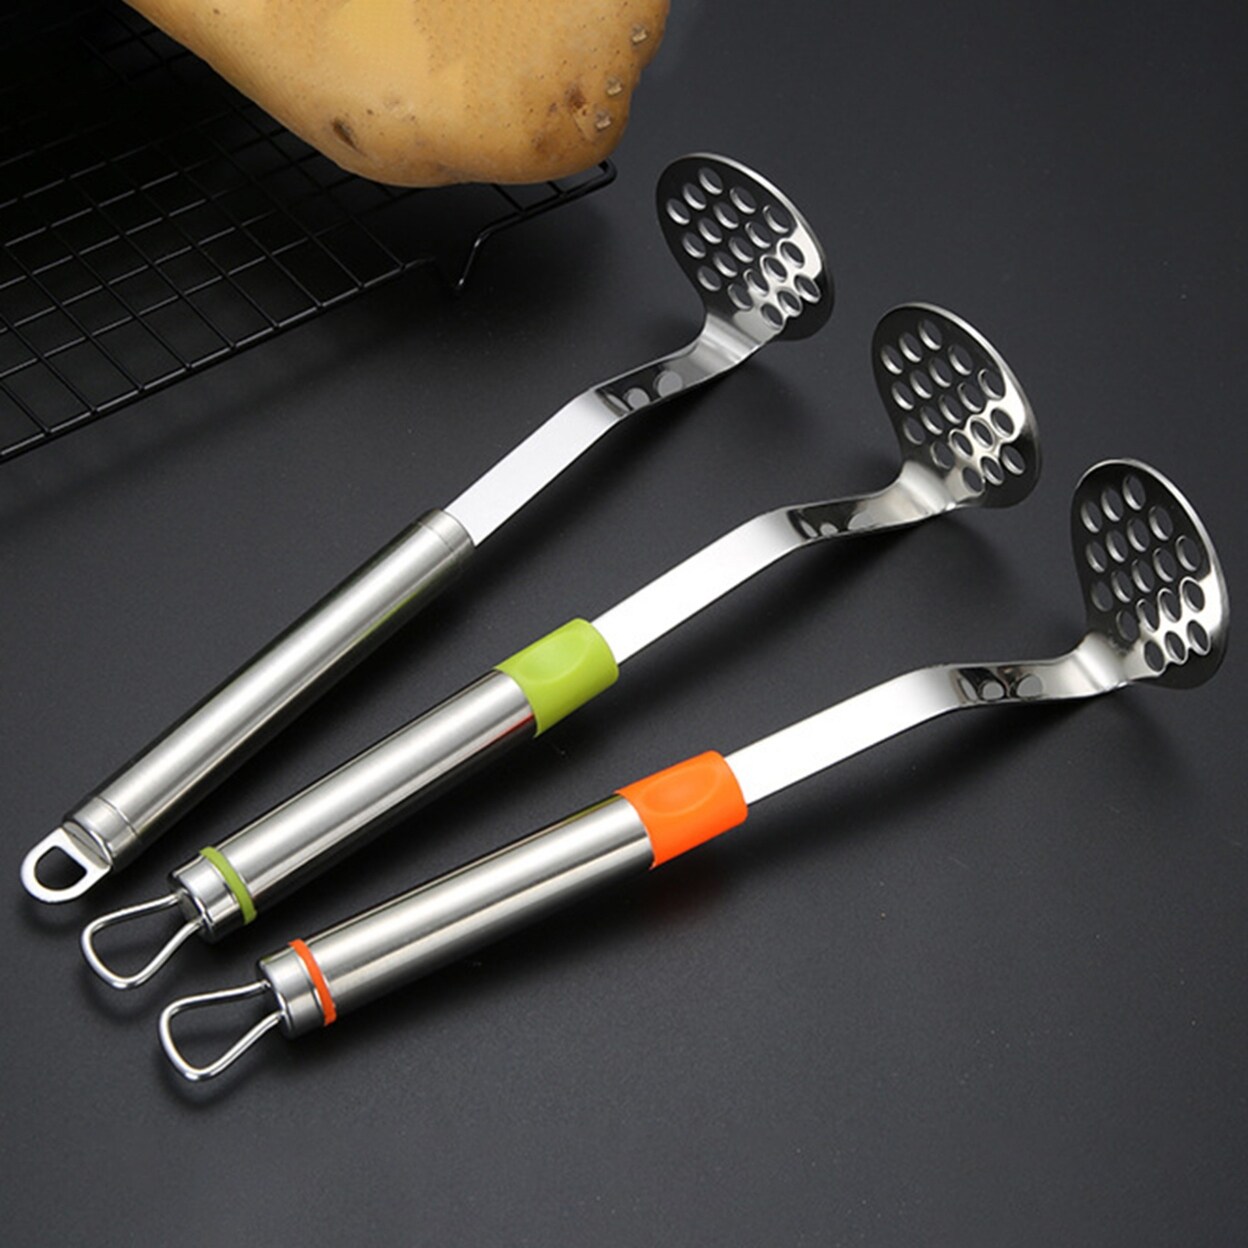 Stainless Steel Heat Resistant Meat Potato Masher Pusher Press